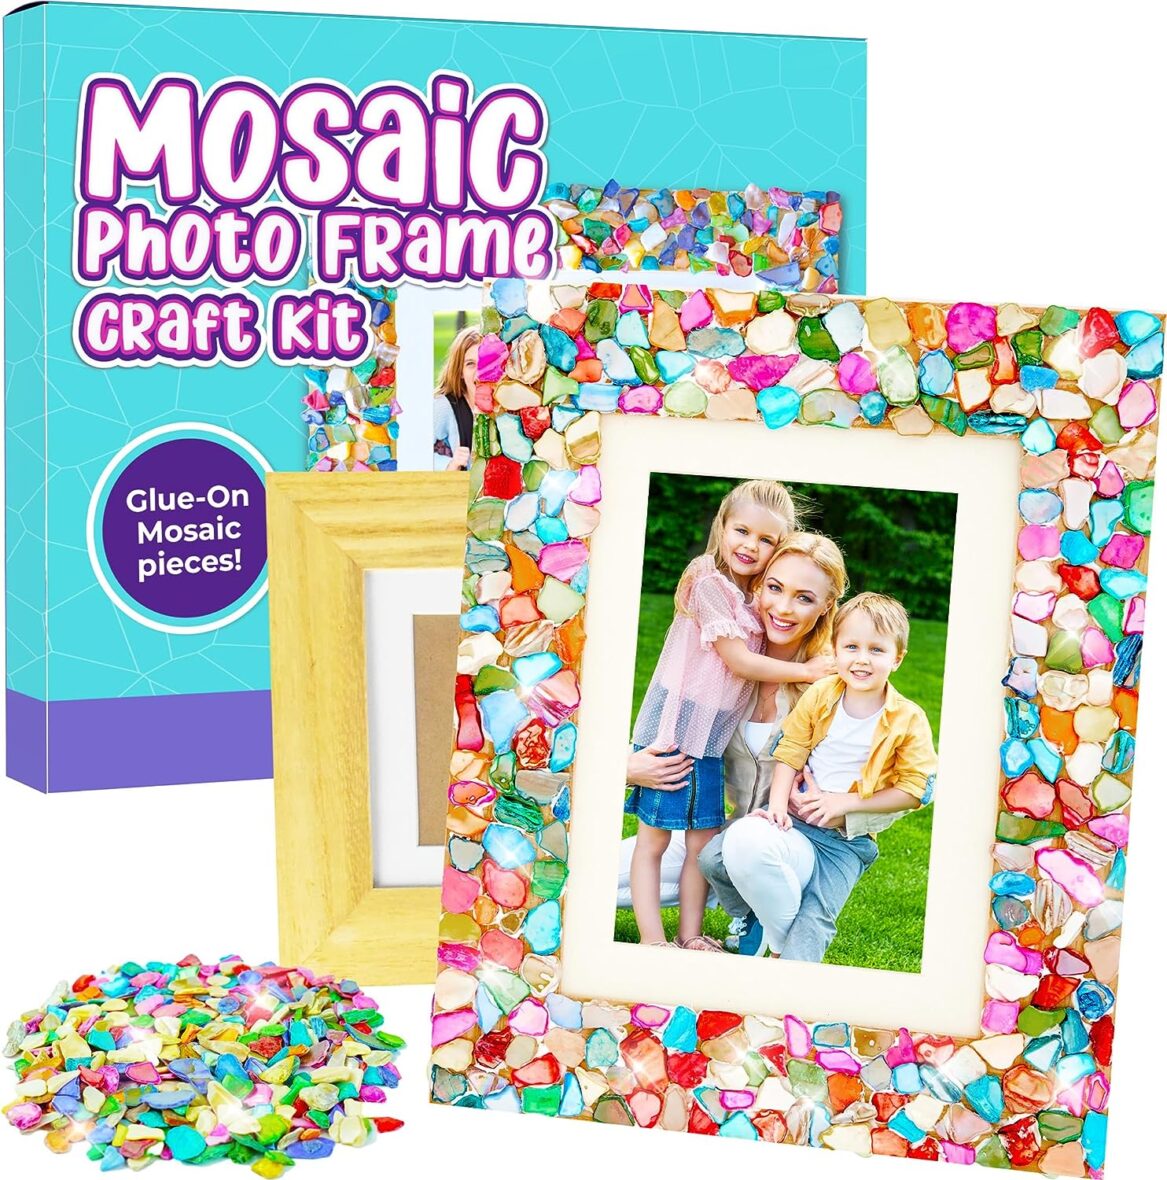 PURPLE LADYBUG DIY Picture Frame Craft Kit for Kids – Mosaic Crafts for Girls Ages 8-12, Arts and Crafts